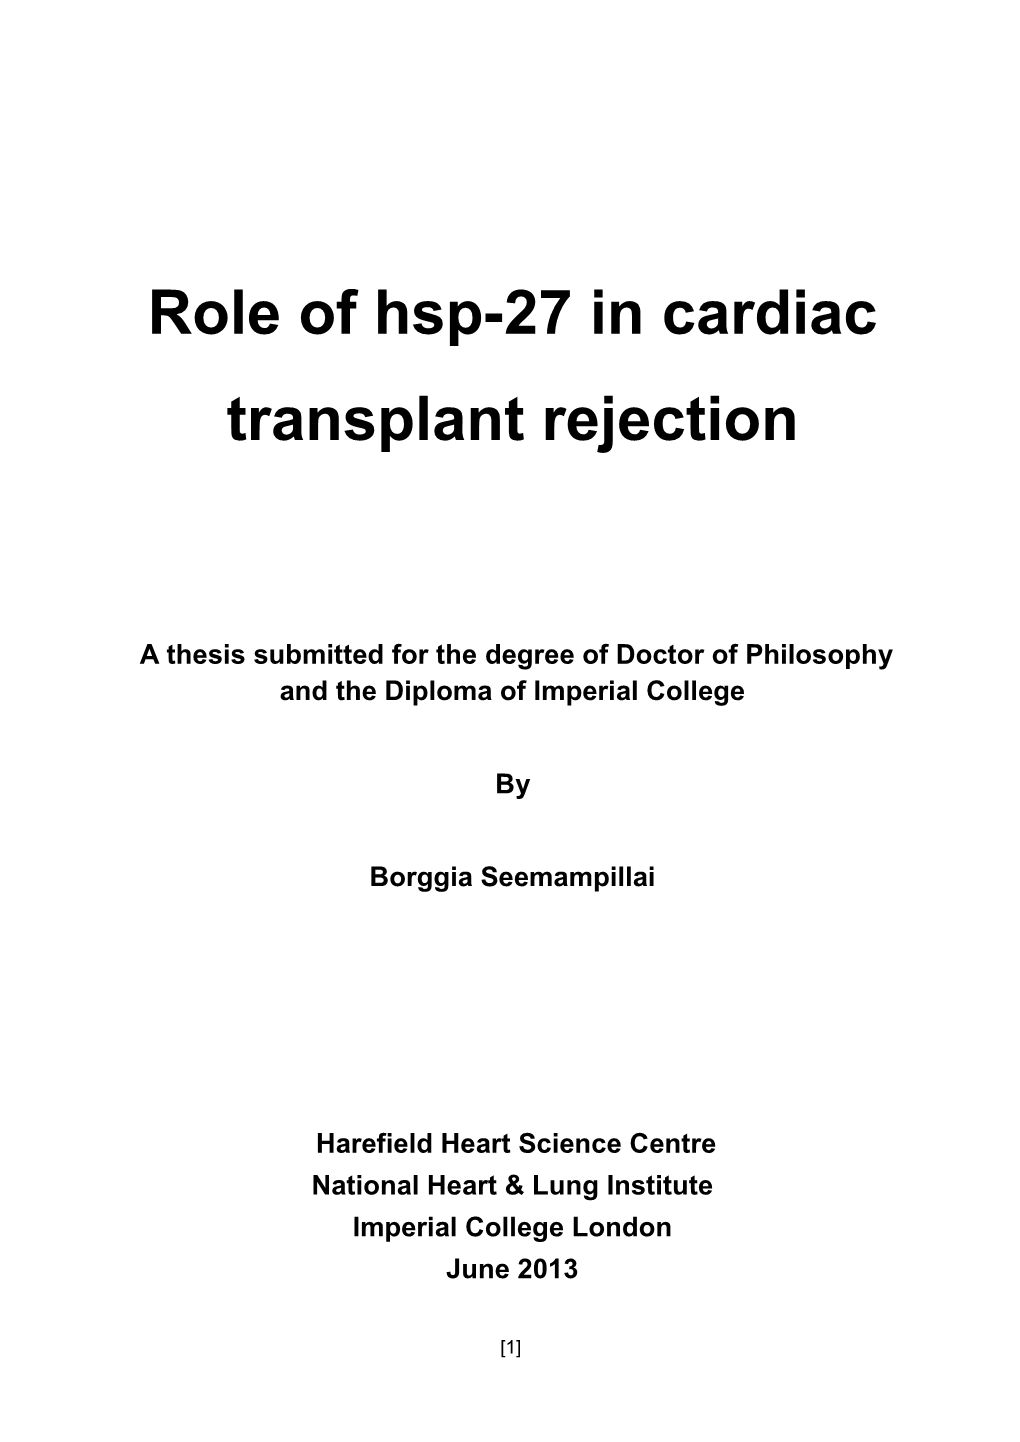 Role of Hsp-27 in Cardiac Transplant Rejection